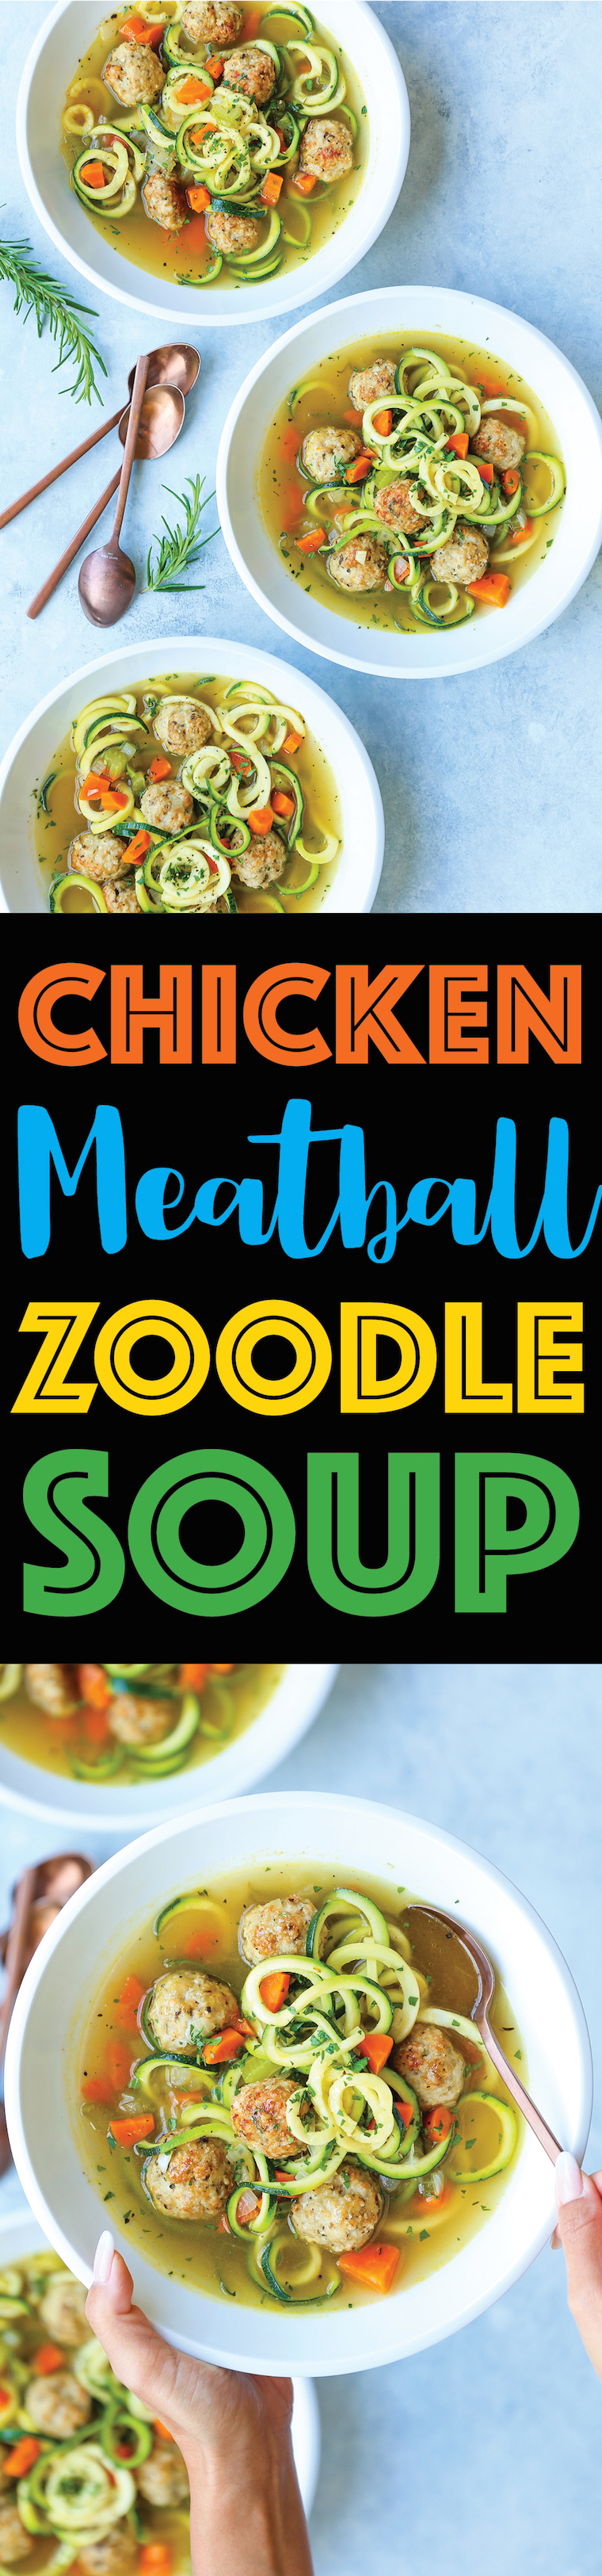 Chicken Meatball Zoodle Soup - Everyone’s favorite chicken noodle soup, but made even healthier with zucchini noodles and the most tender chicken meatballs!